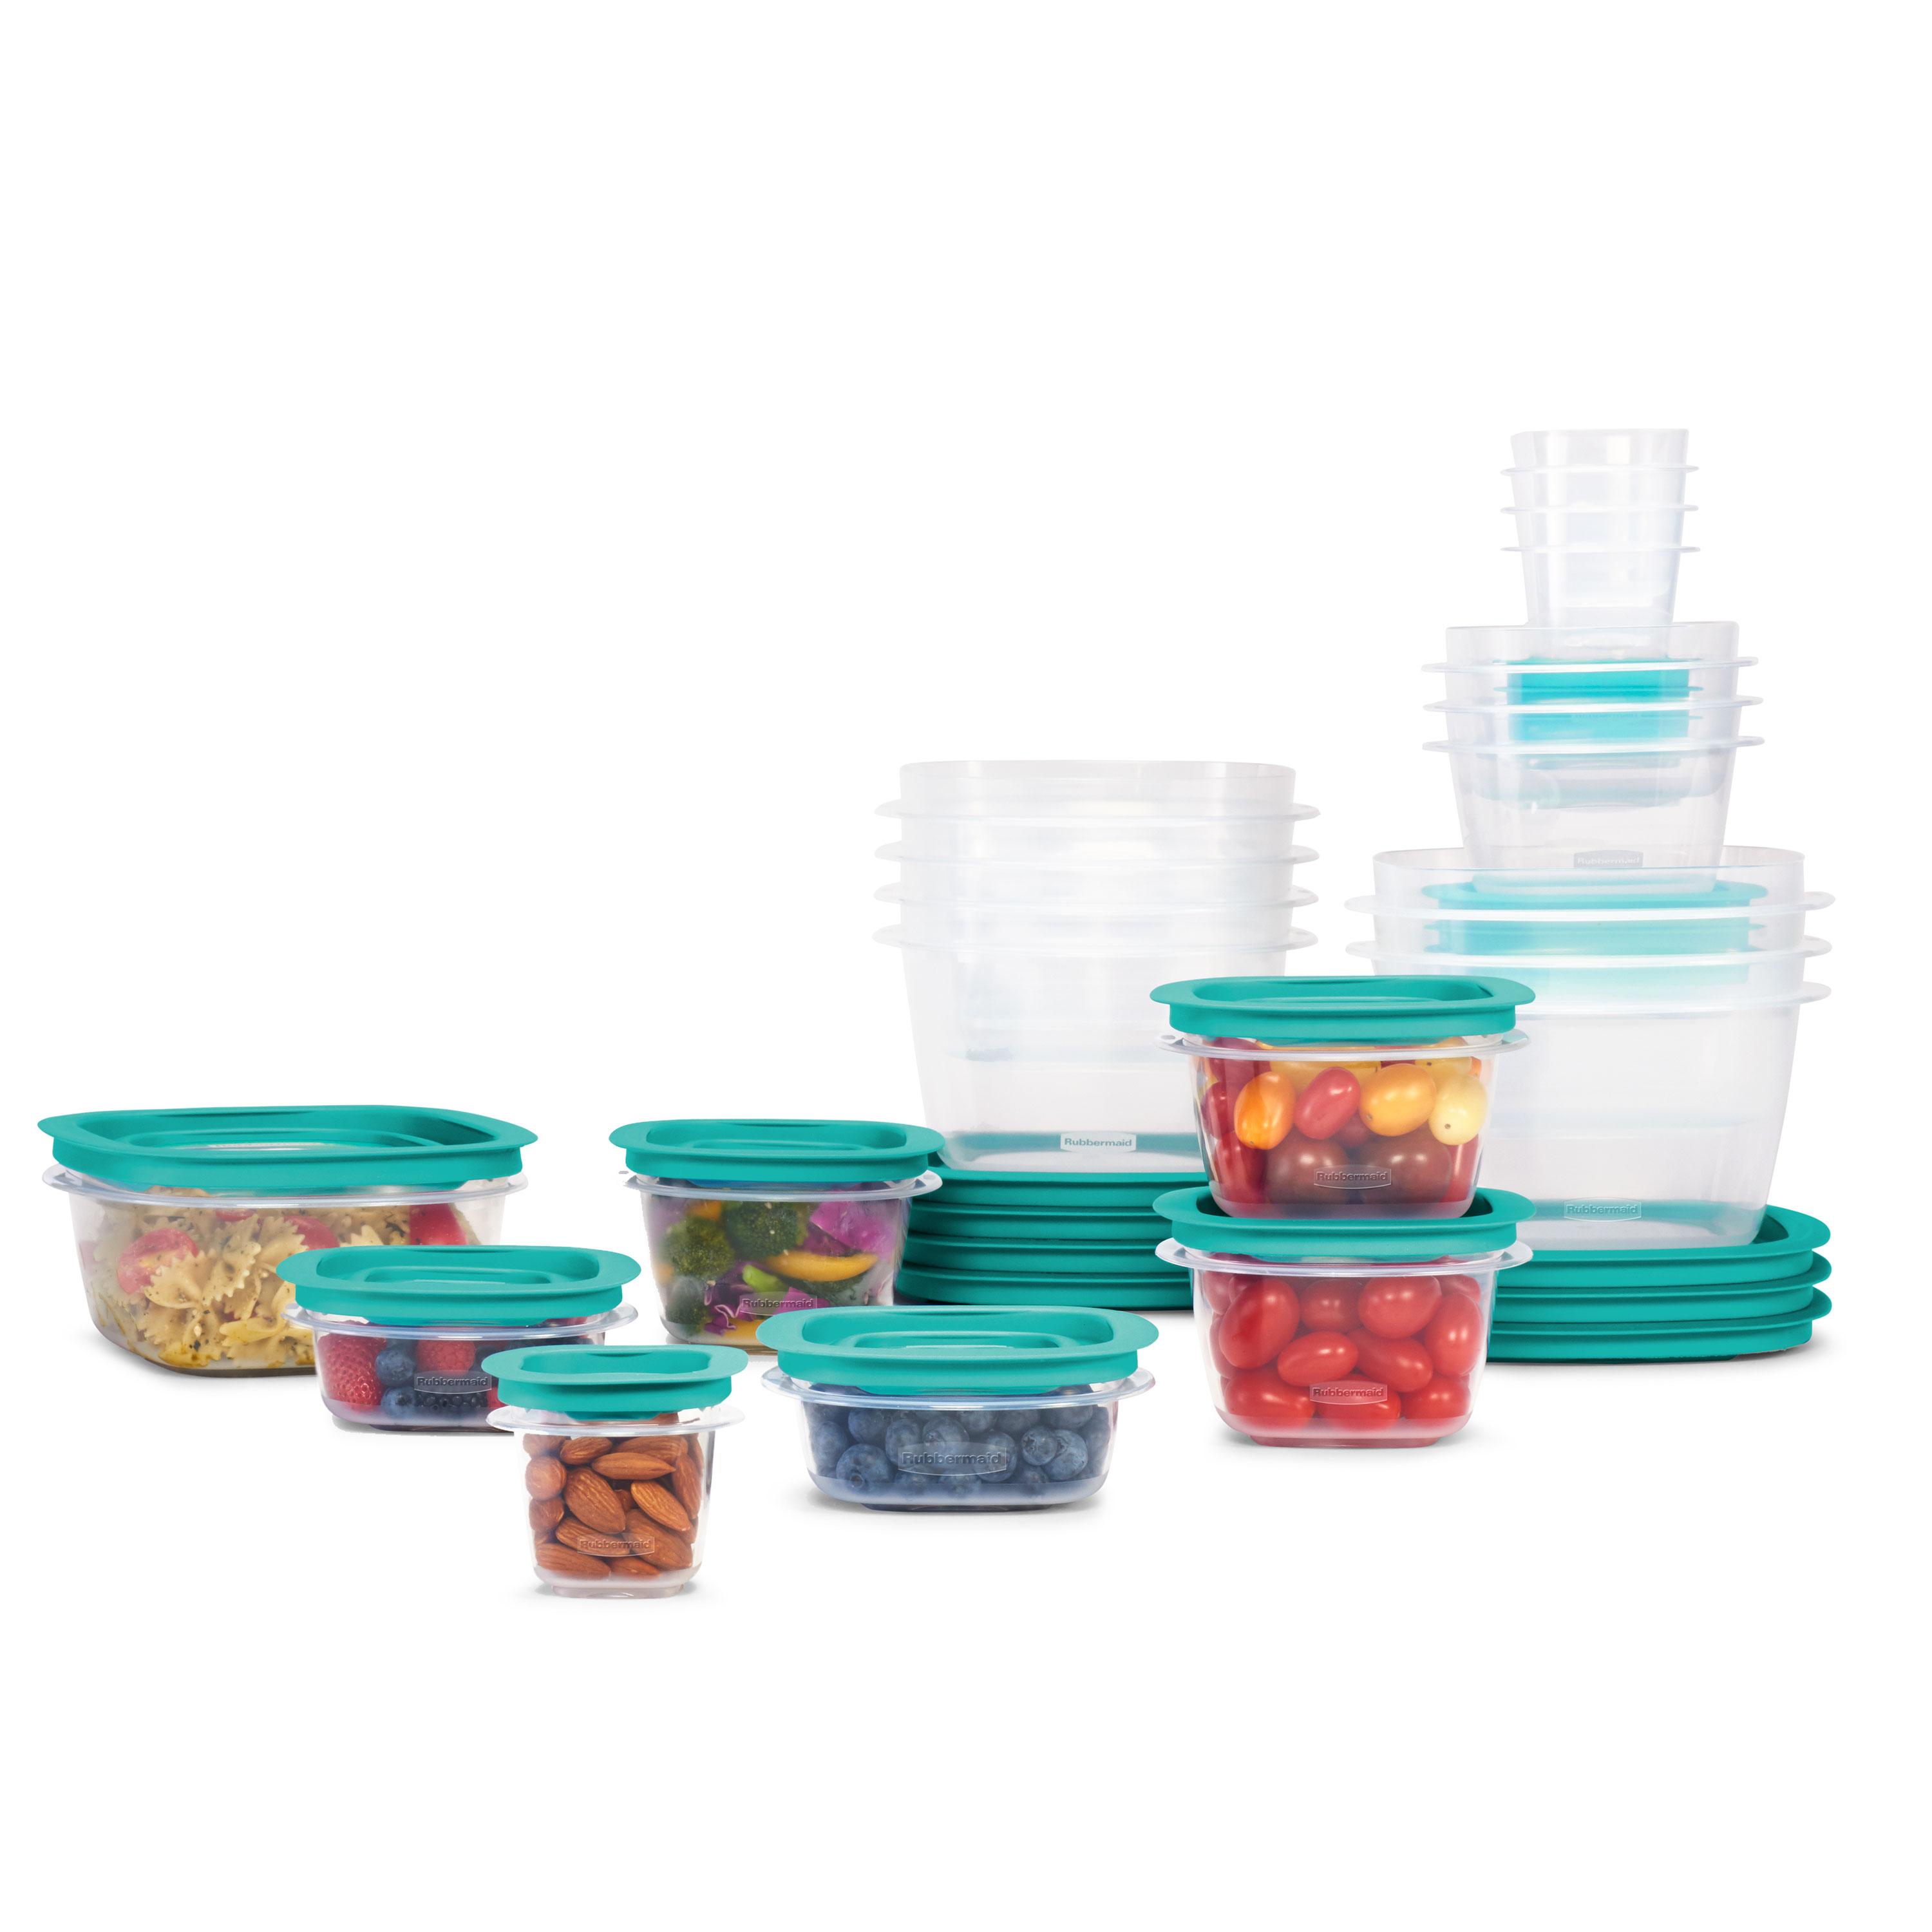 42-Piece Rubbermaid Press and Lock Easy Find Lids Food Storage Containers for $18.99